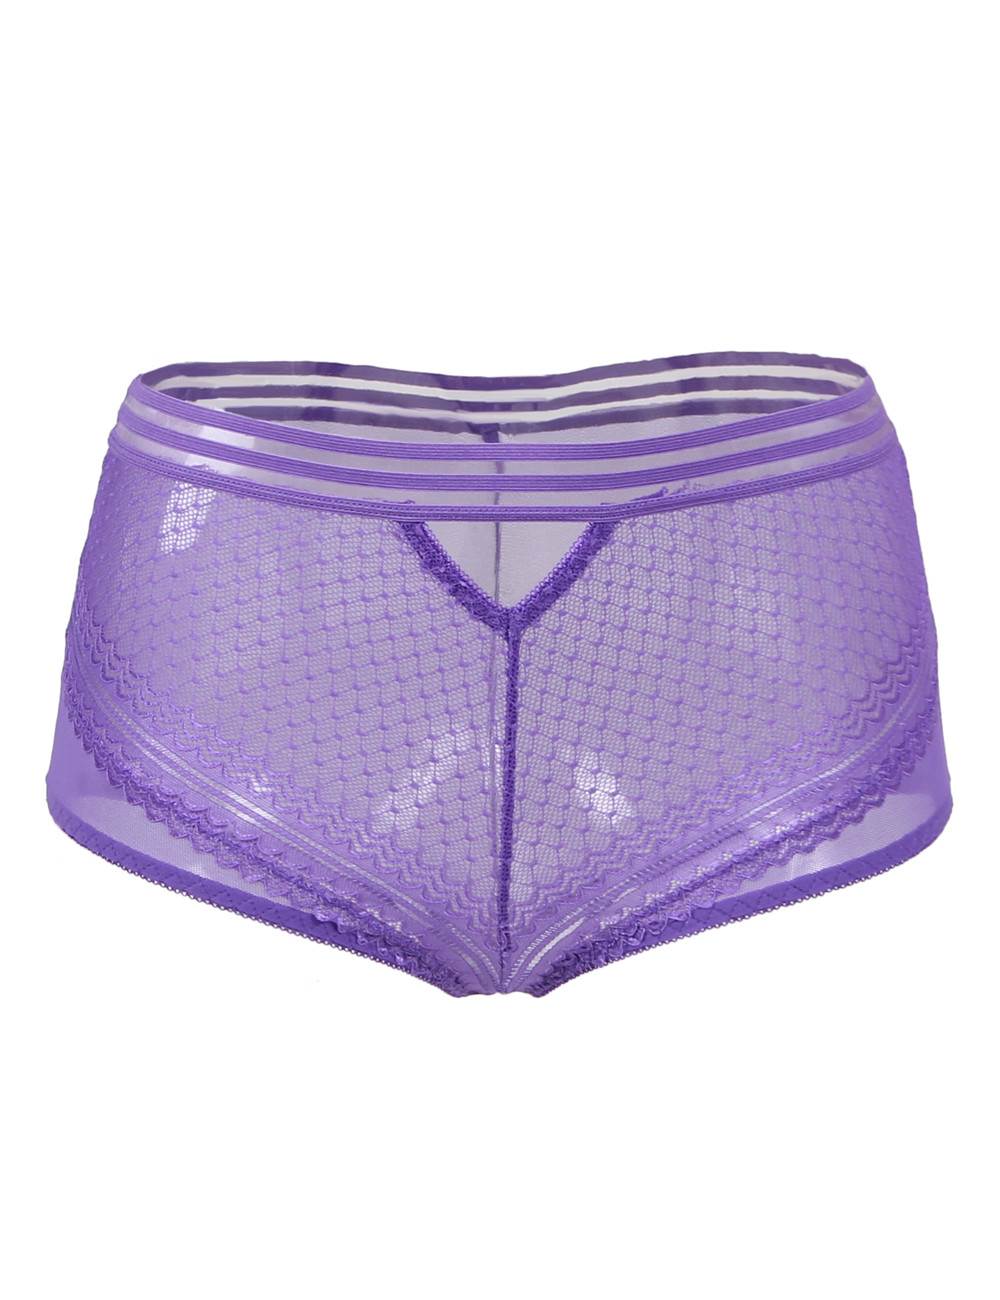 Wholesale Sexy Panties Manufacturer from China| OhyeahLady.com